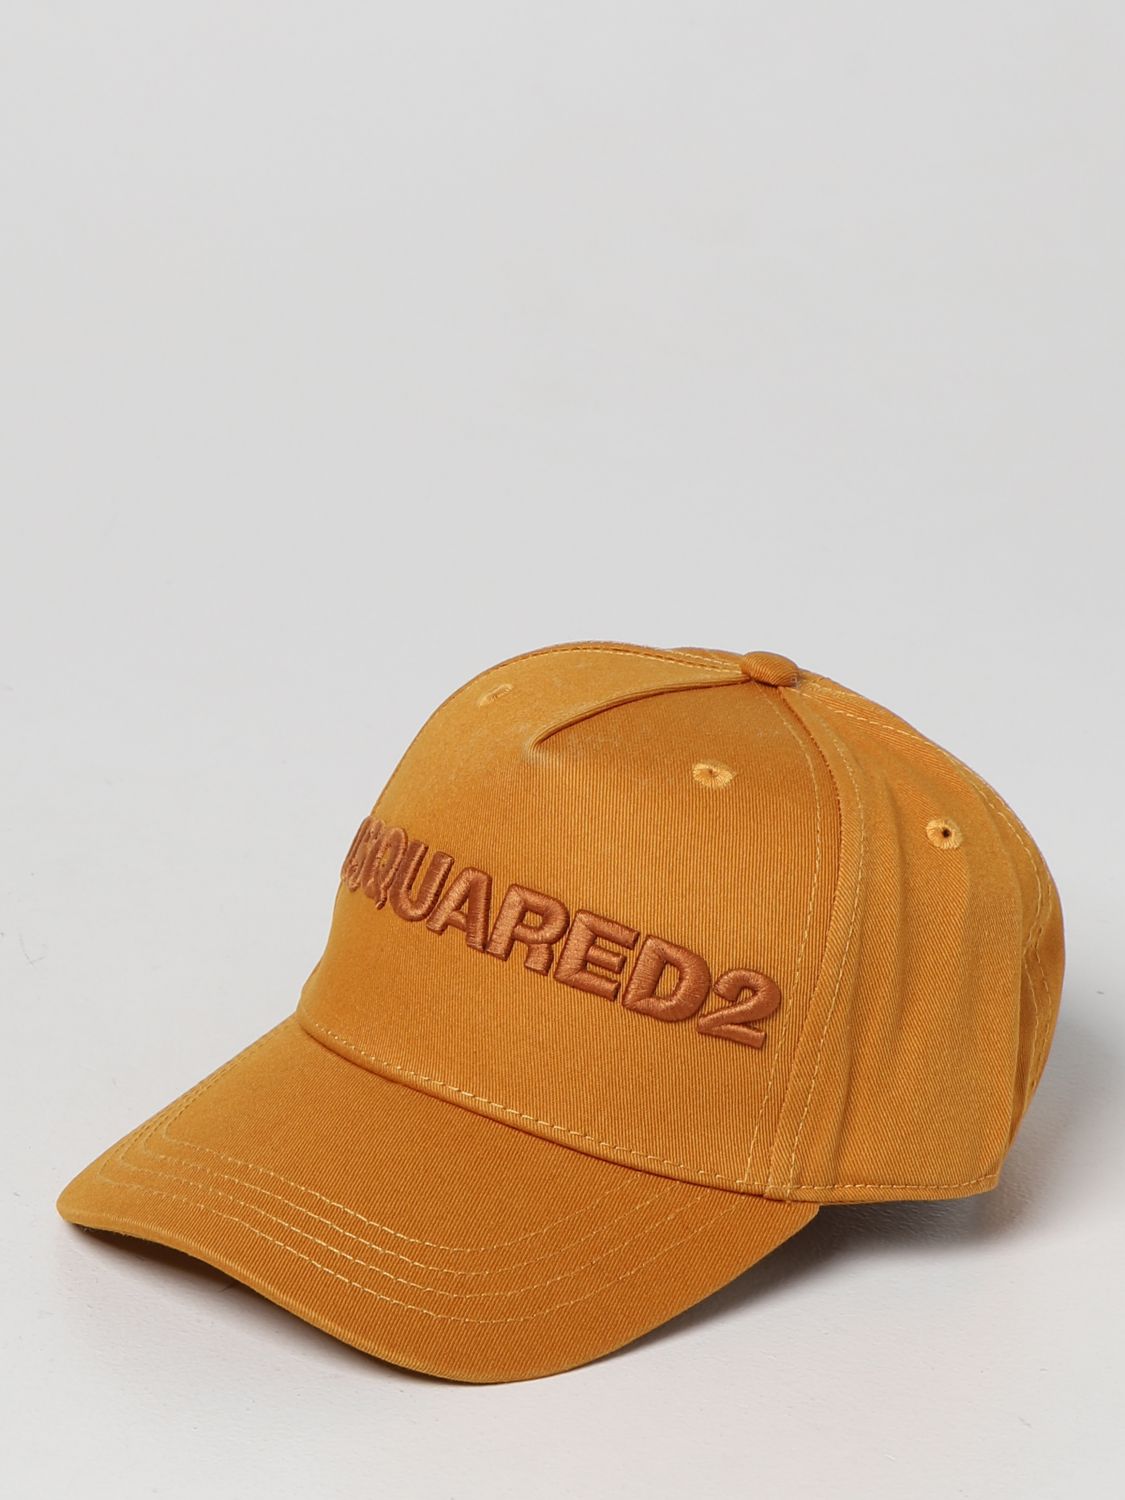 DSQUARED2 BASEBALL CAP WITH LOGO,356375046